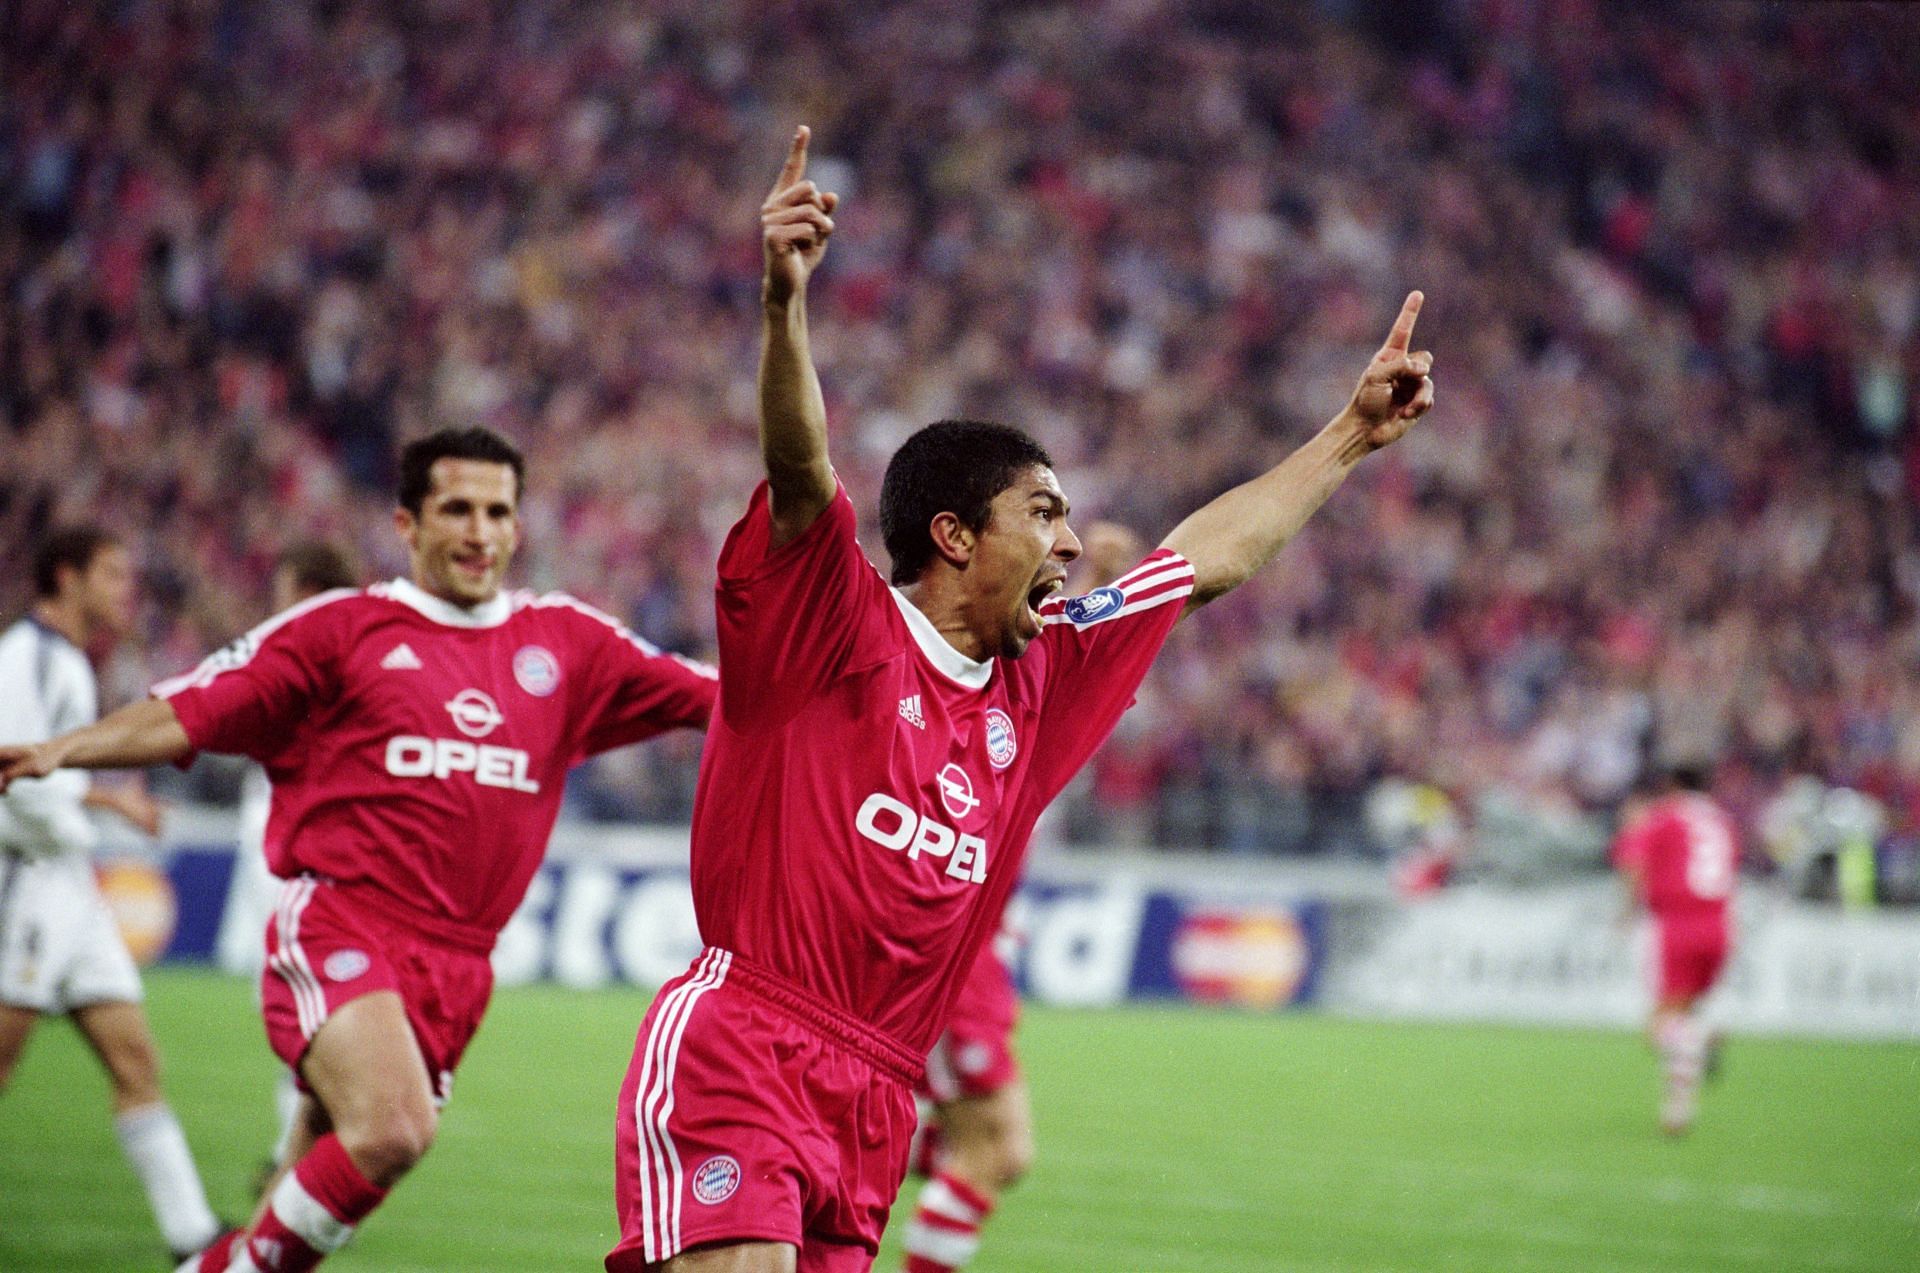 Giovane Elber (centre) celebrates a goal for Bayern Munich against Real Madrid.